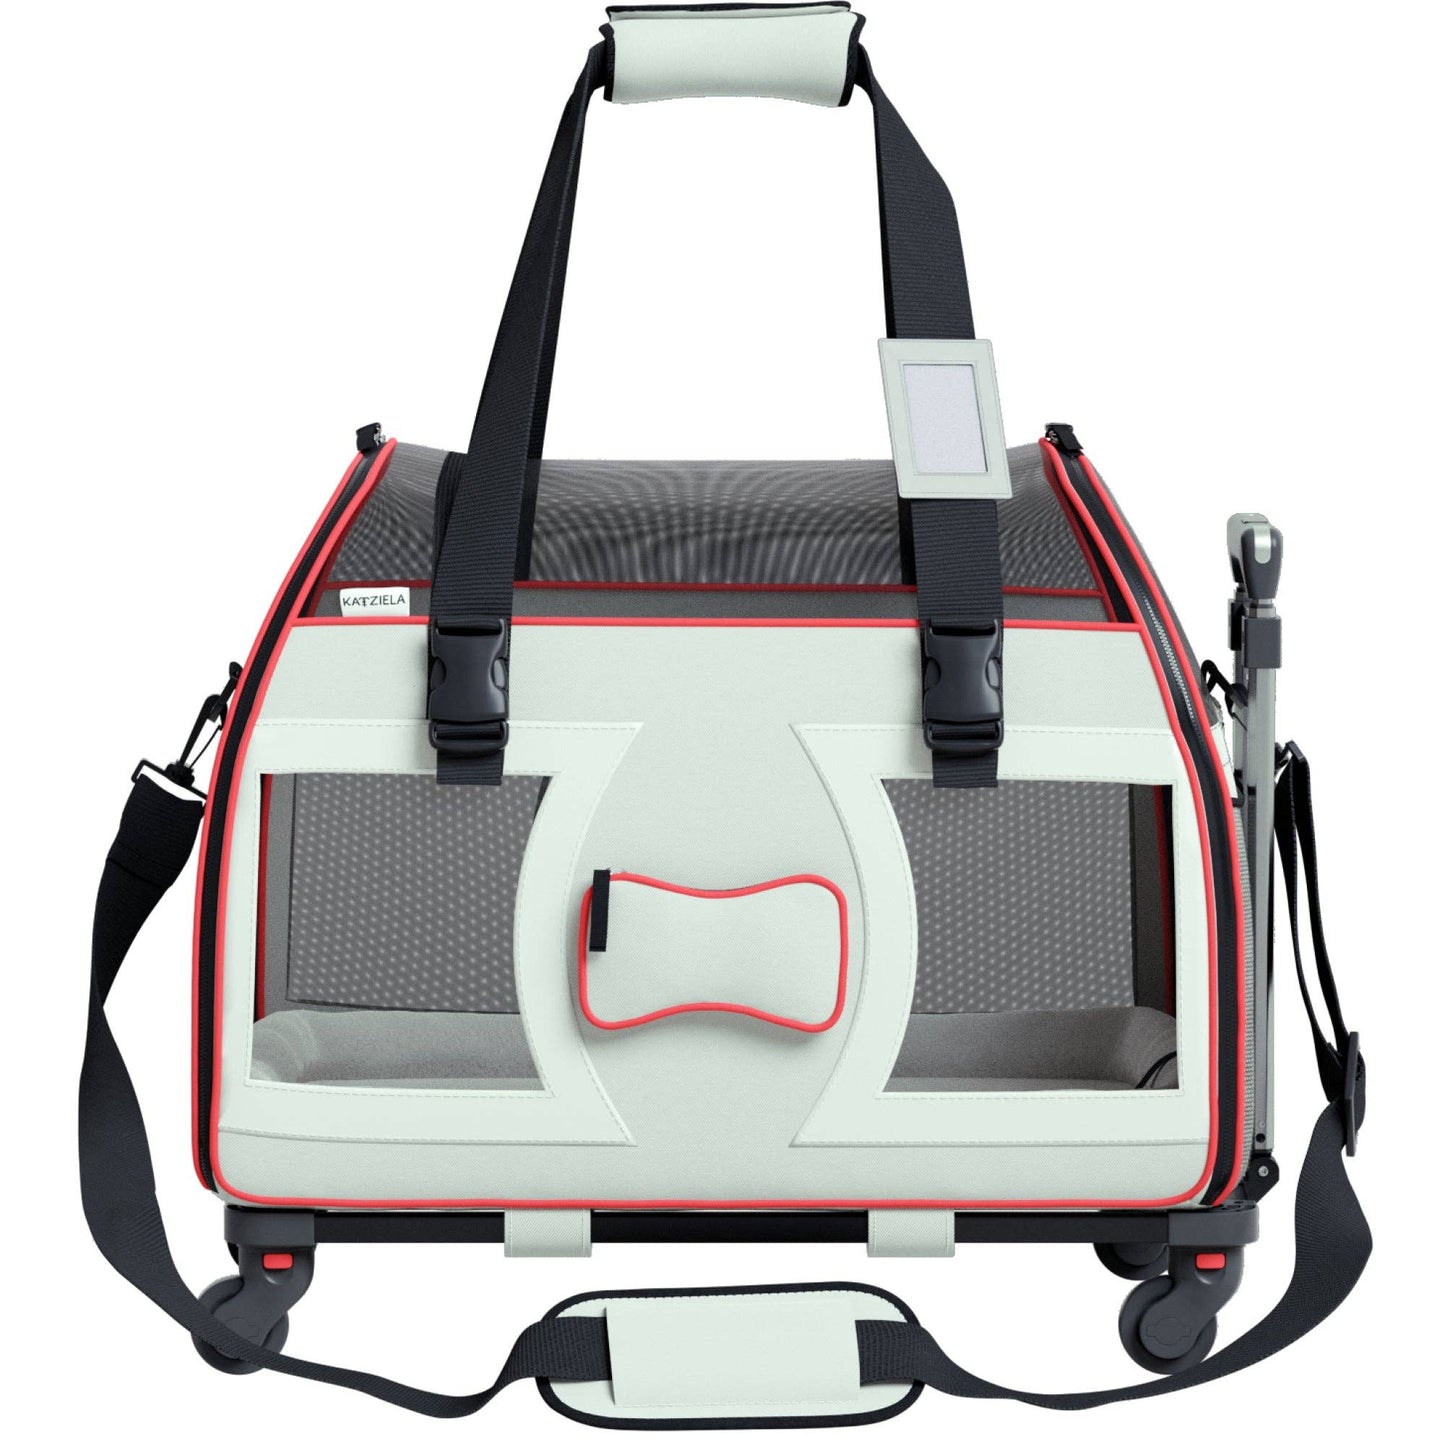 Luxury Rider Pet Carrier with Removable Wheels Gray and Red Image